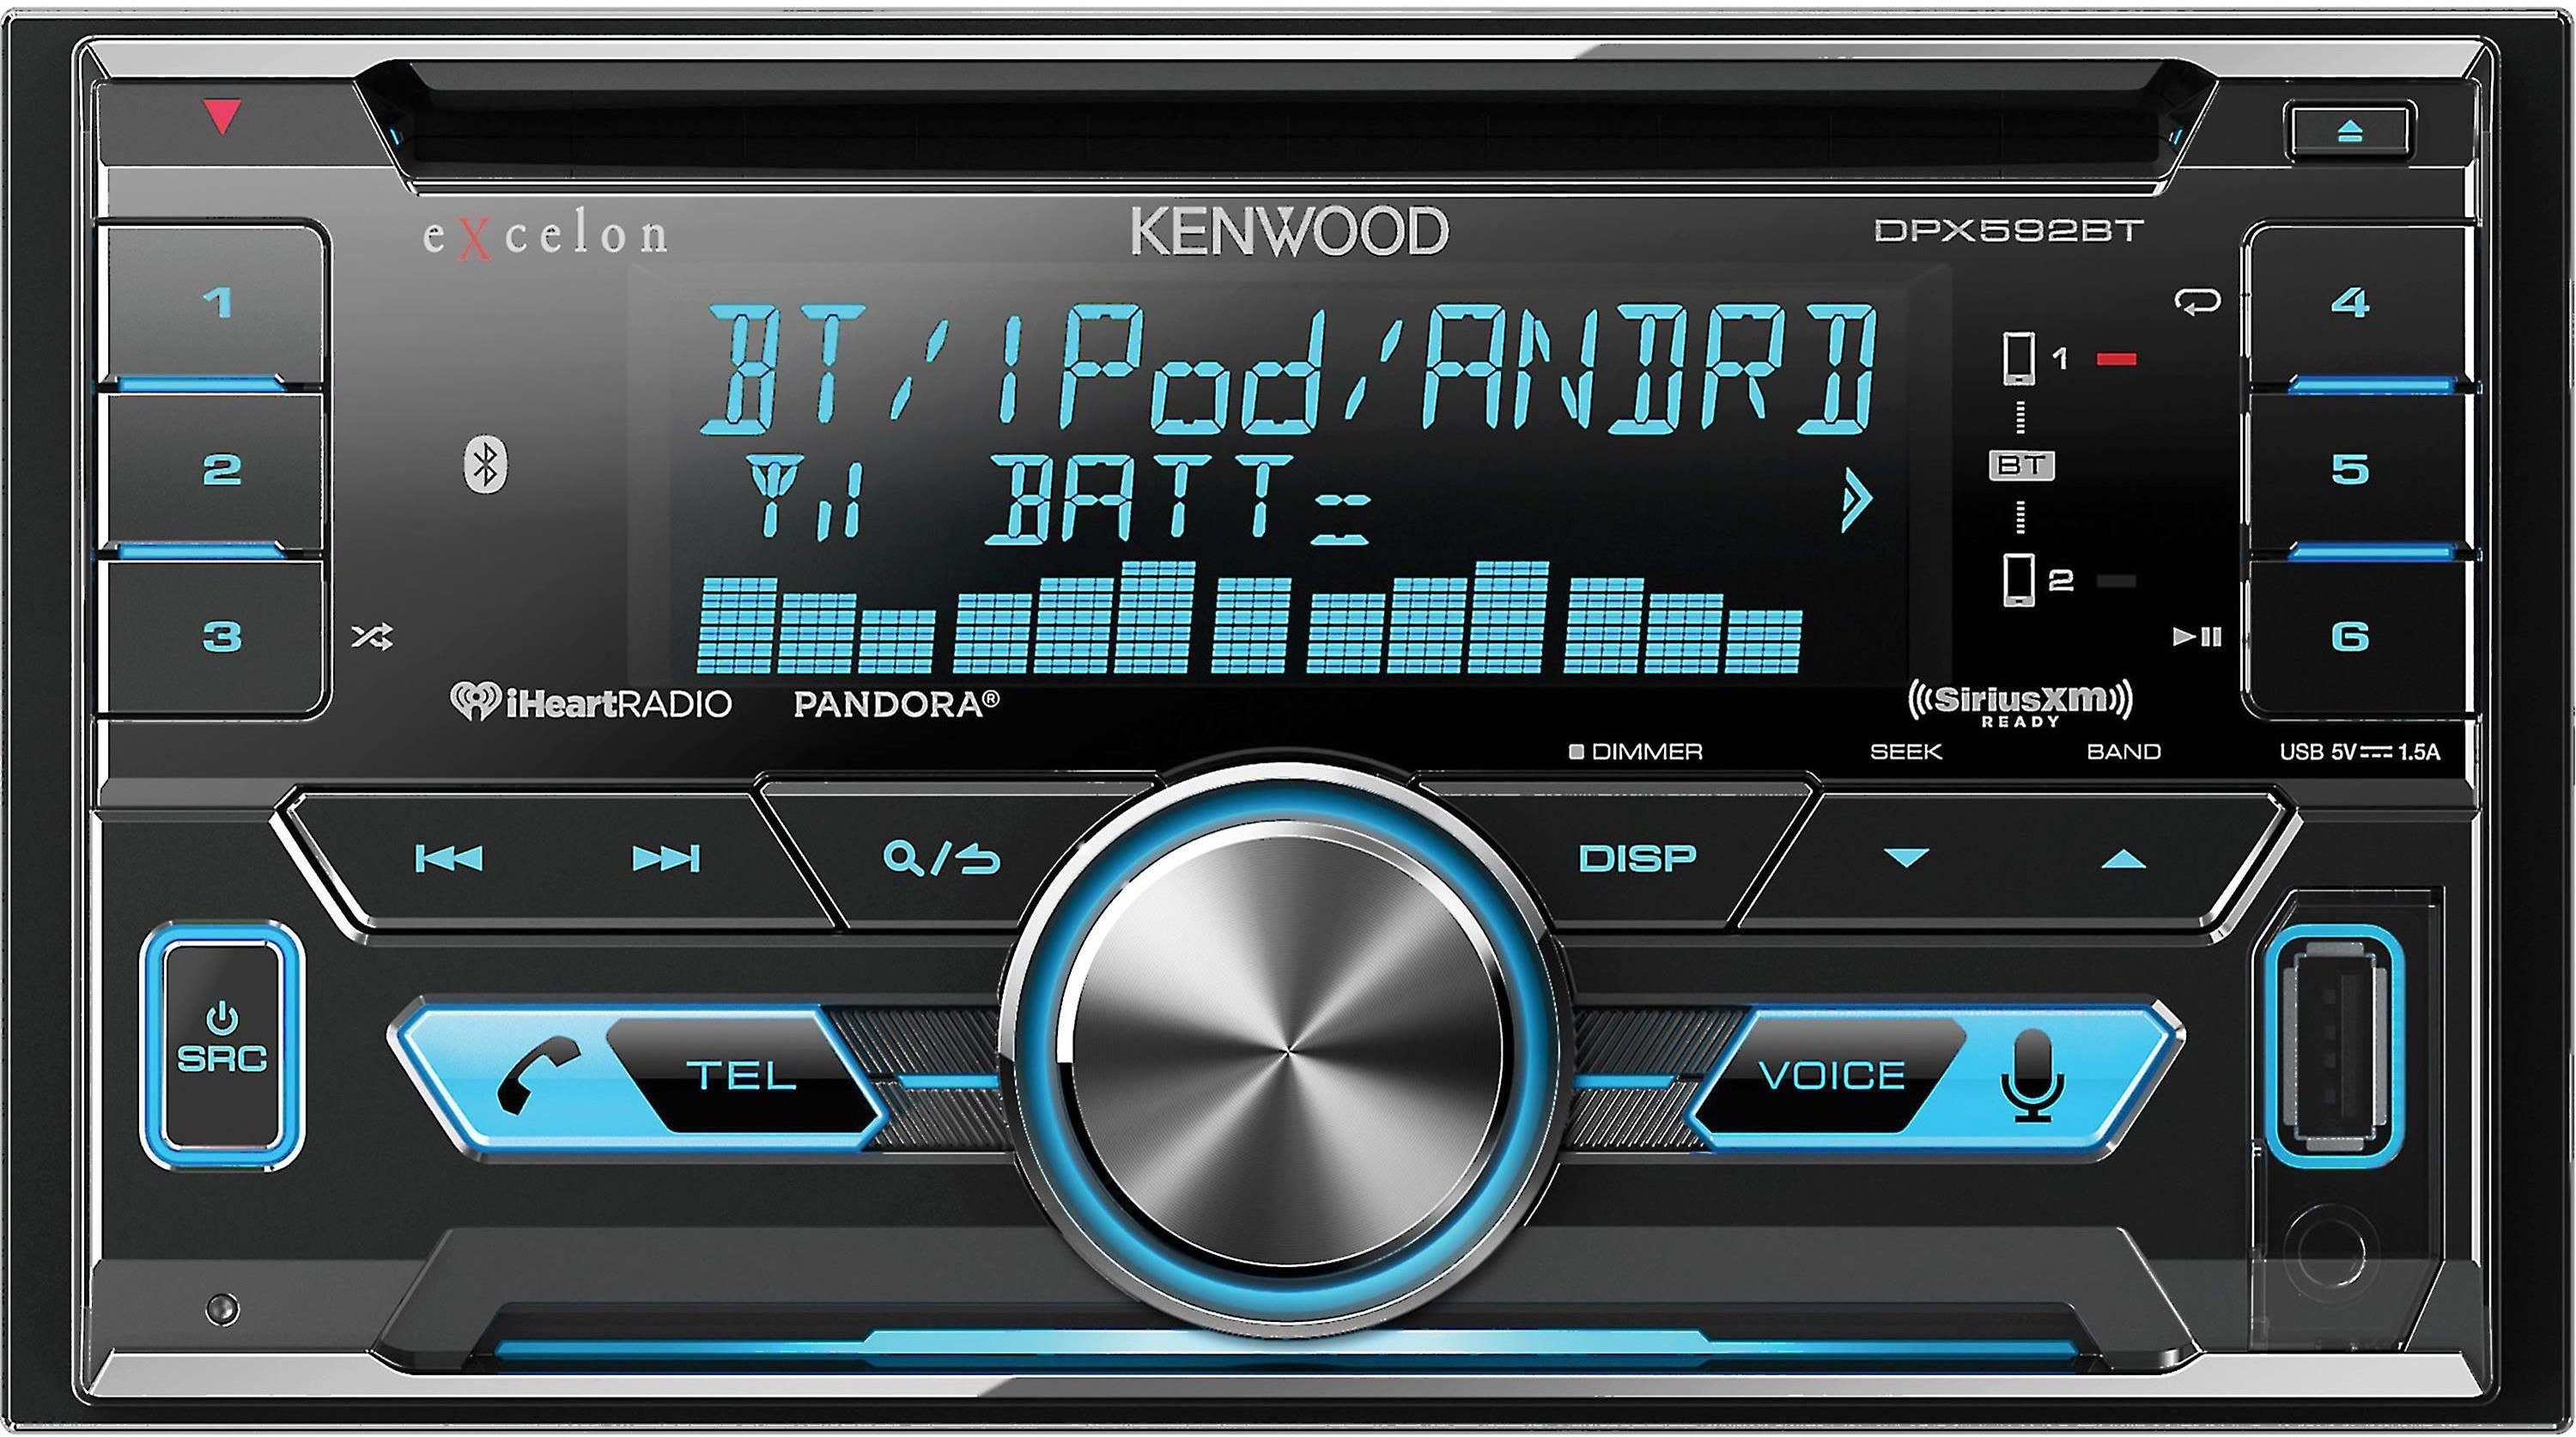 Kenwood Excelon 2-DIN CD Receiver | Innovative Concepts Audio